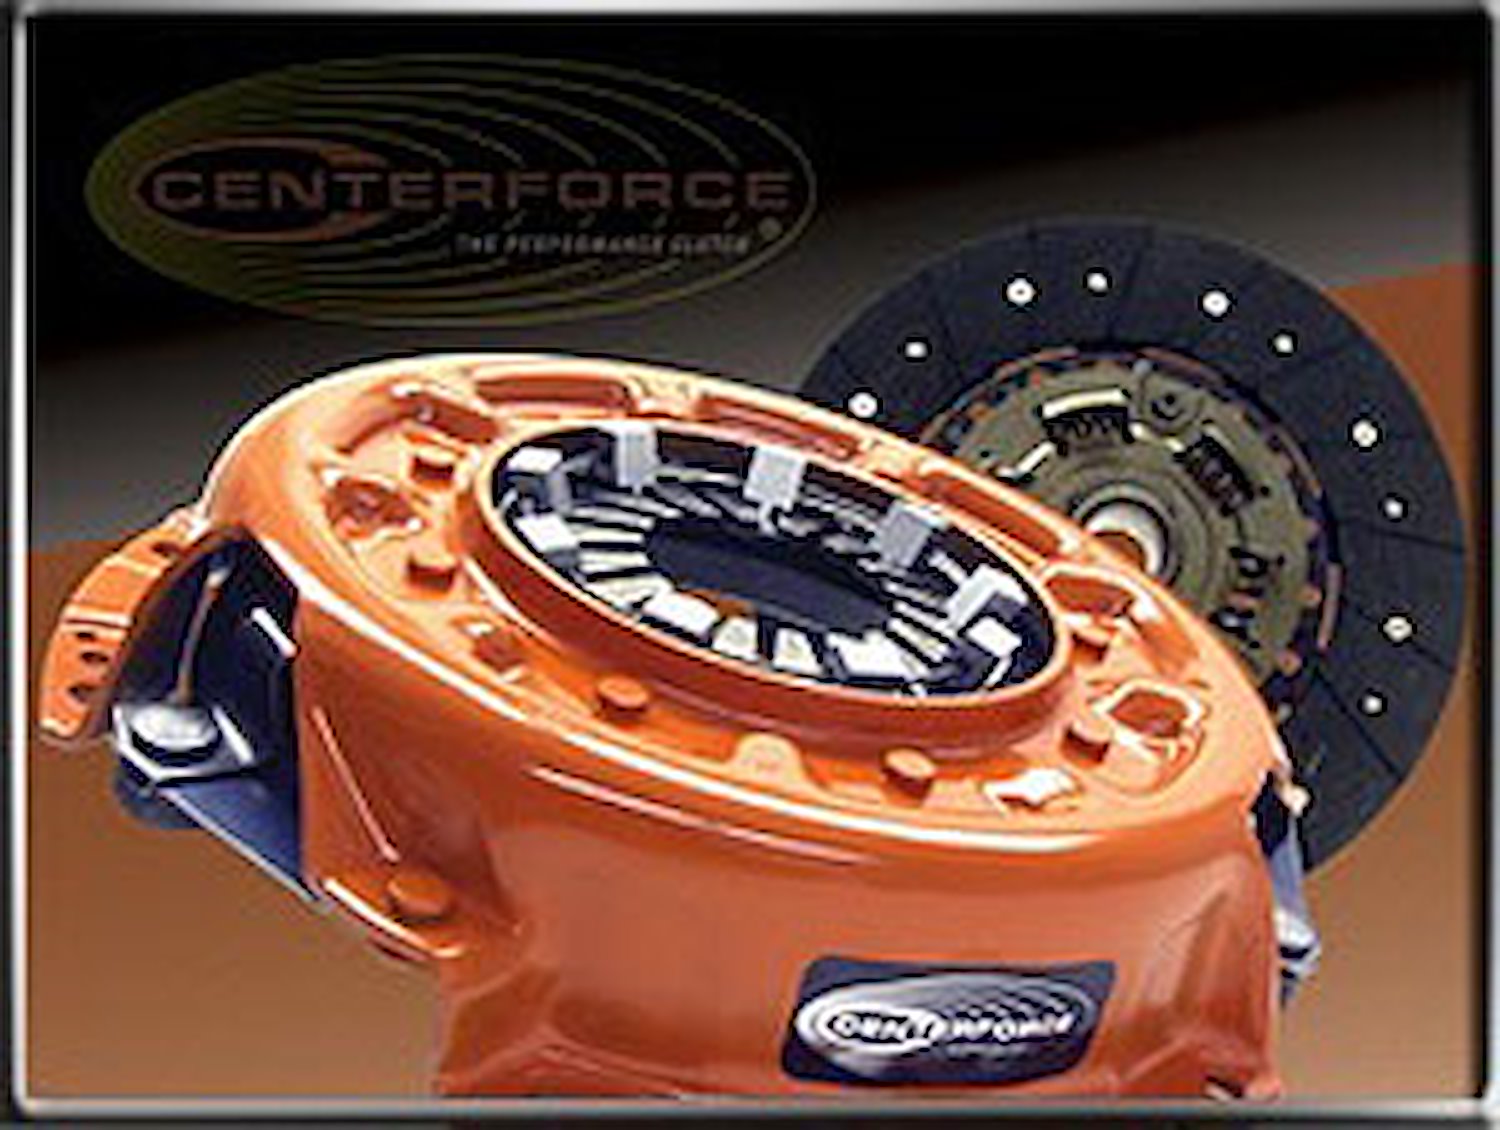 Centerforce II Clutch Kit Includes Pressure Plate, Disc, Throwout Bearing, Pilot Bearing and Alignment Tool